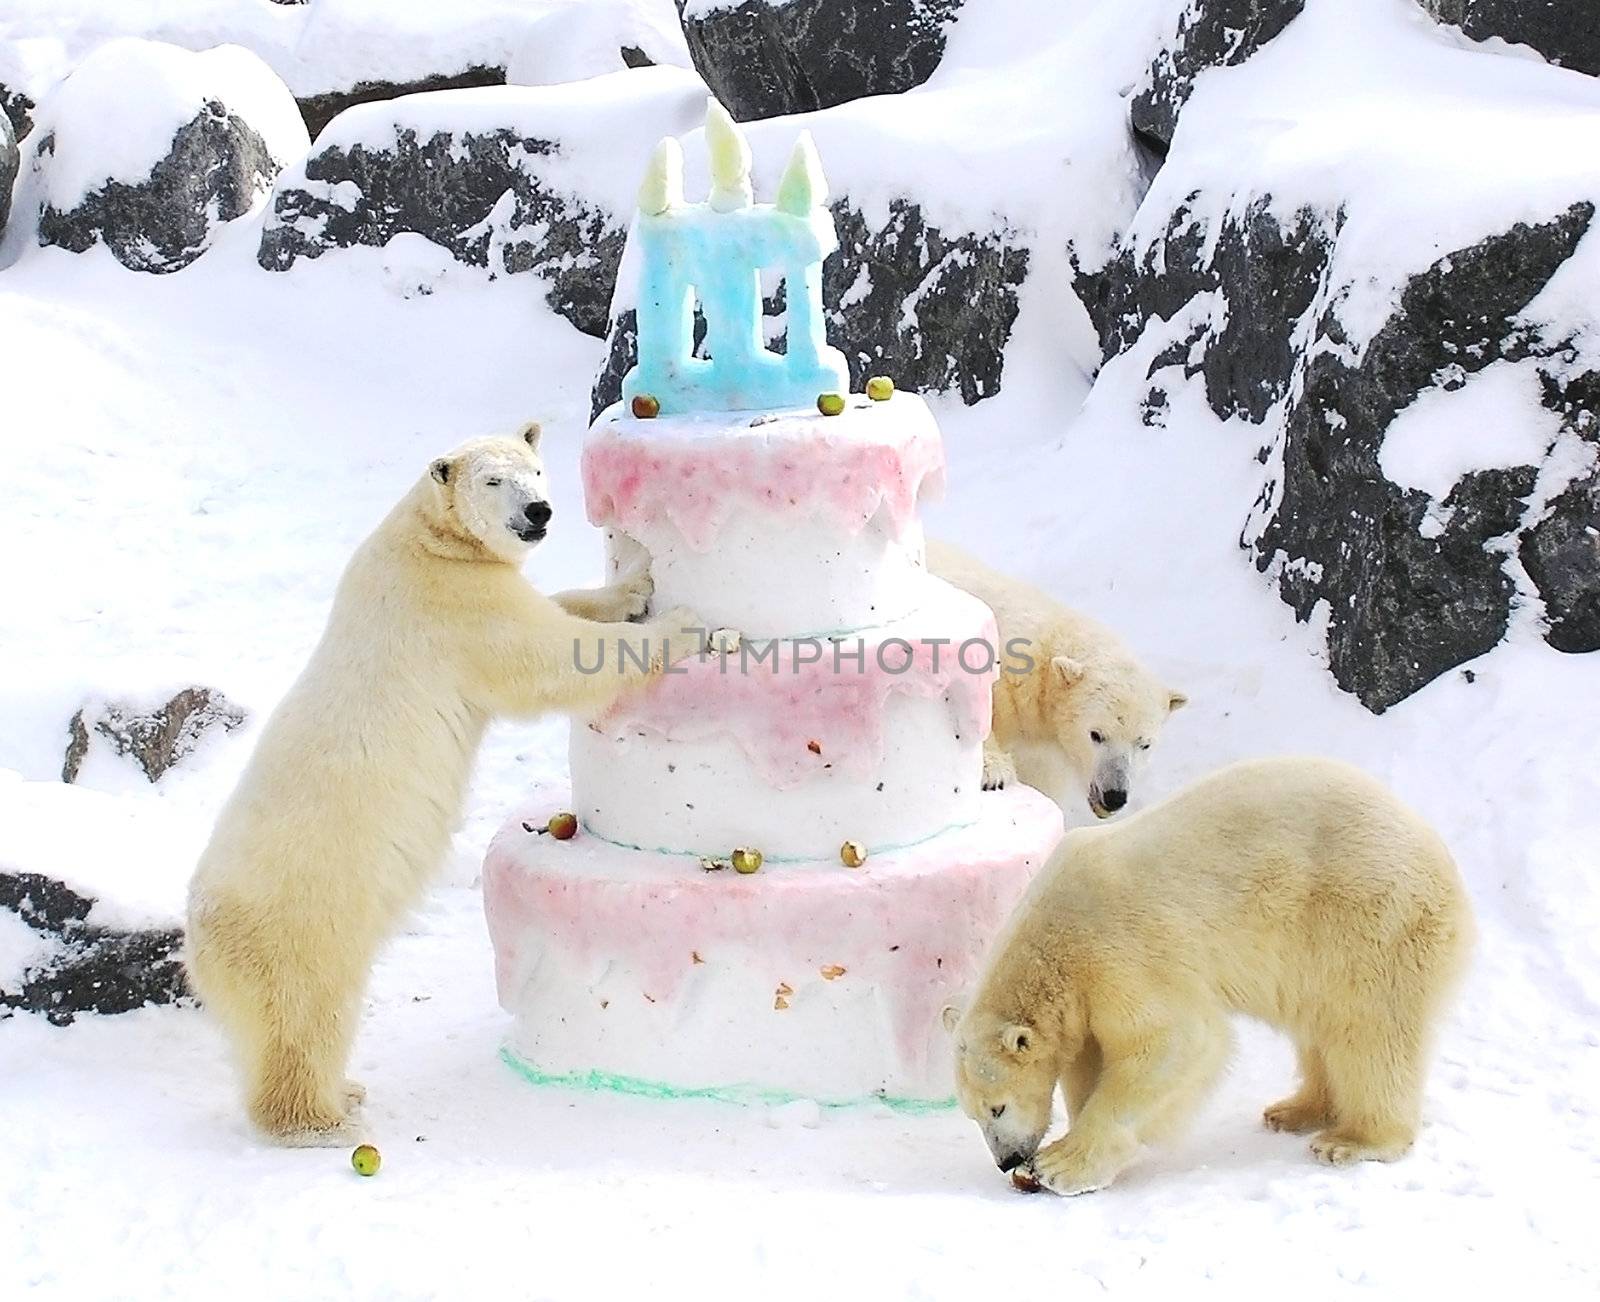 Three polar bears celebrating their birthday with a giant cake made of snow fruits and fish